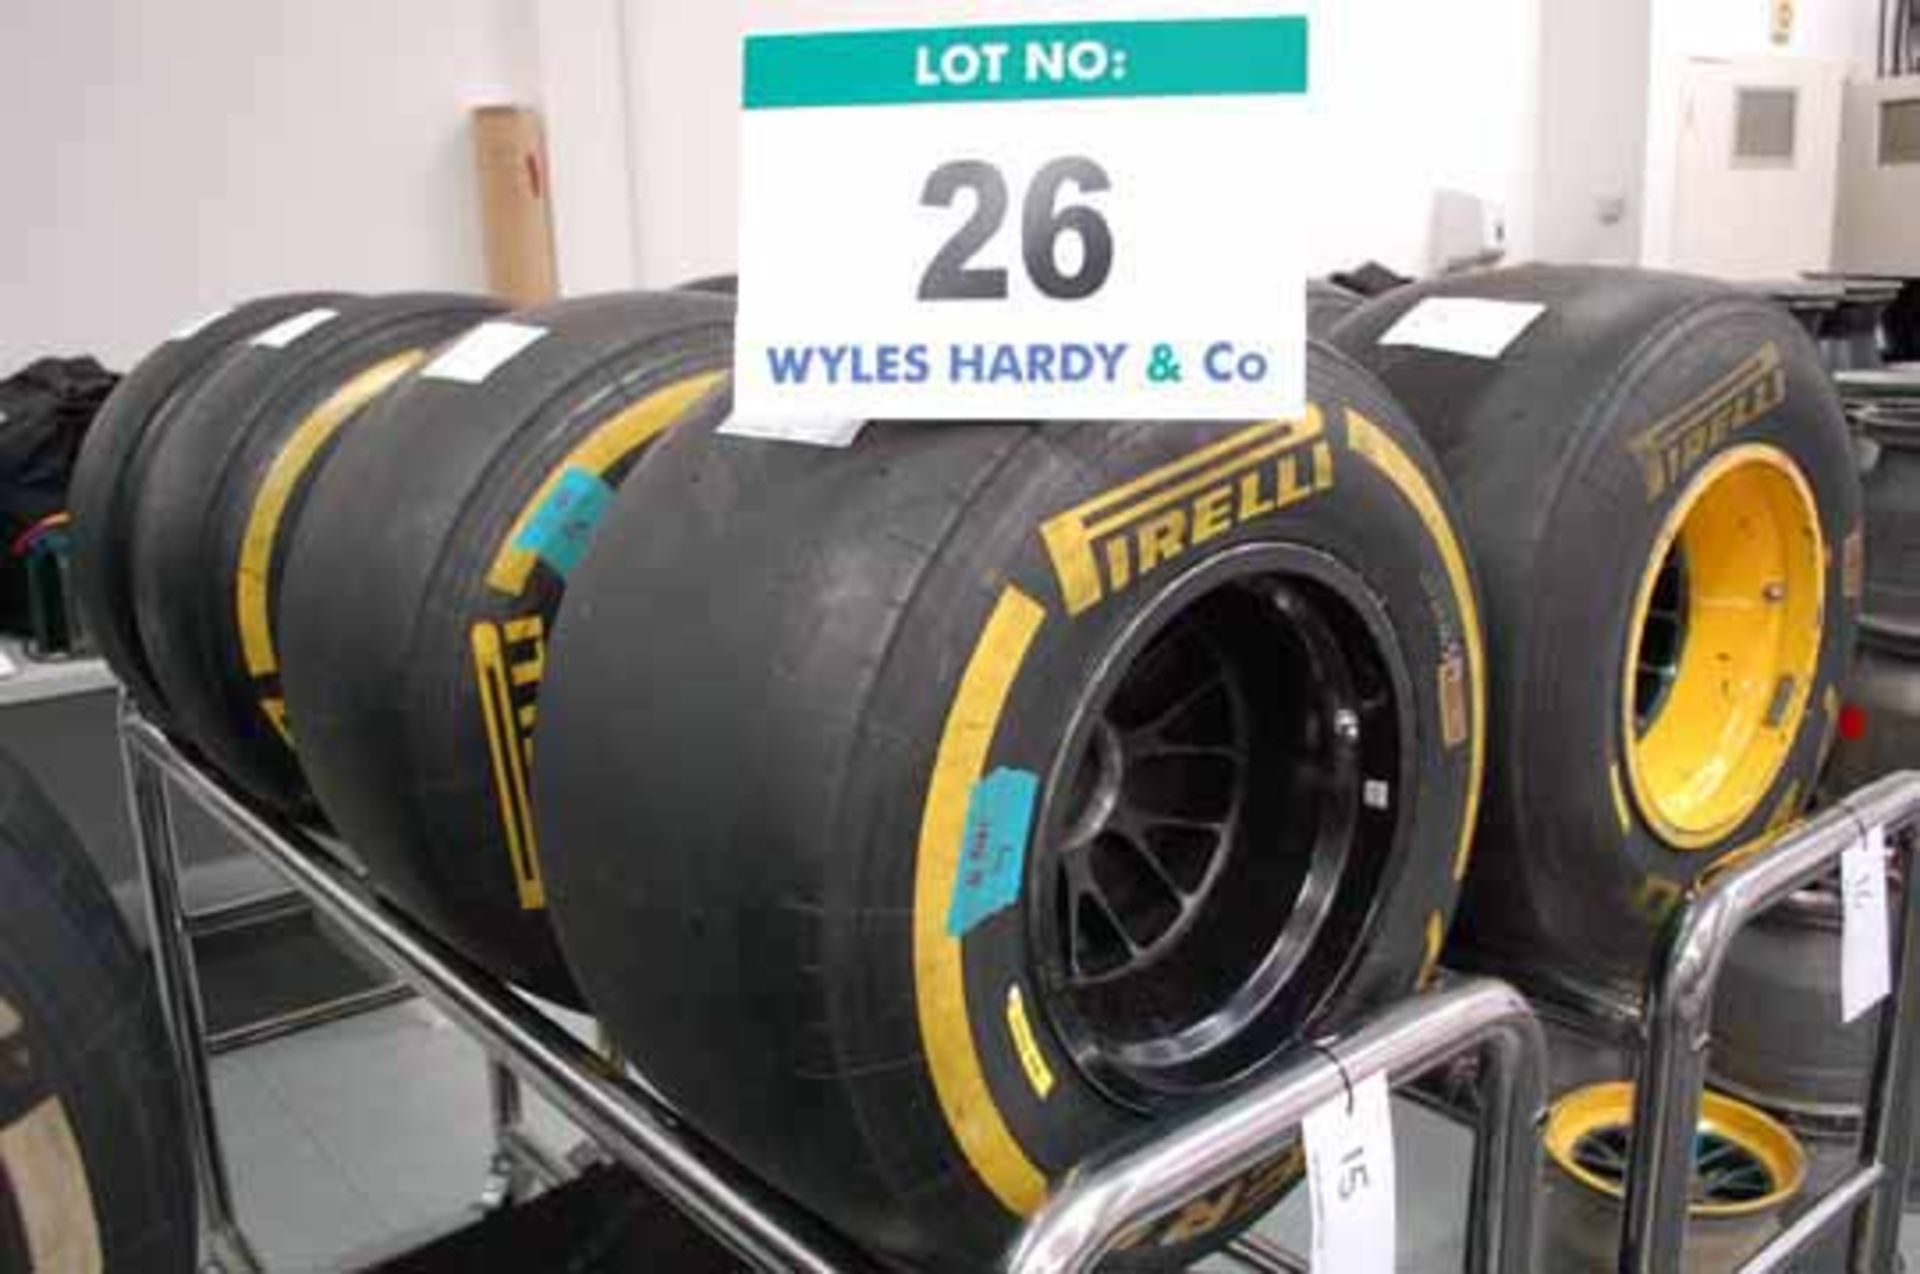 Two 2013 Show Rear Wheel Rims mounted with PIRELLI Slick Show Tyres